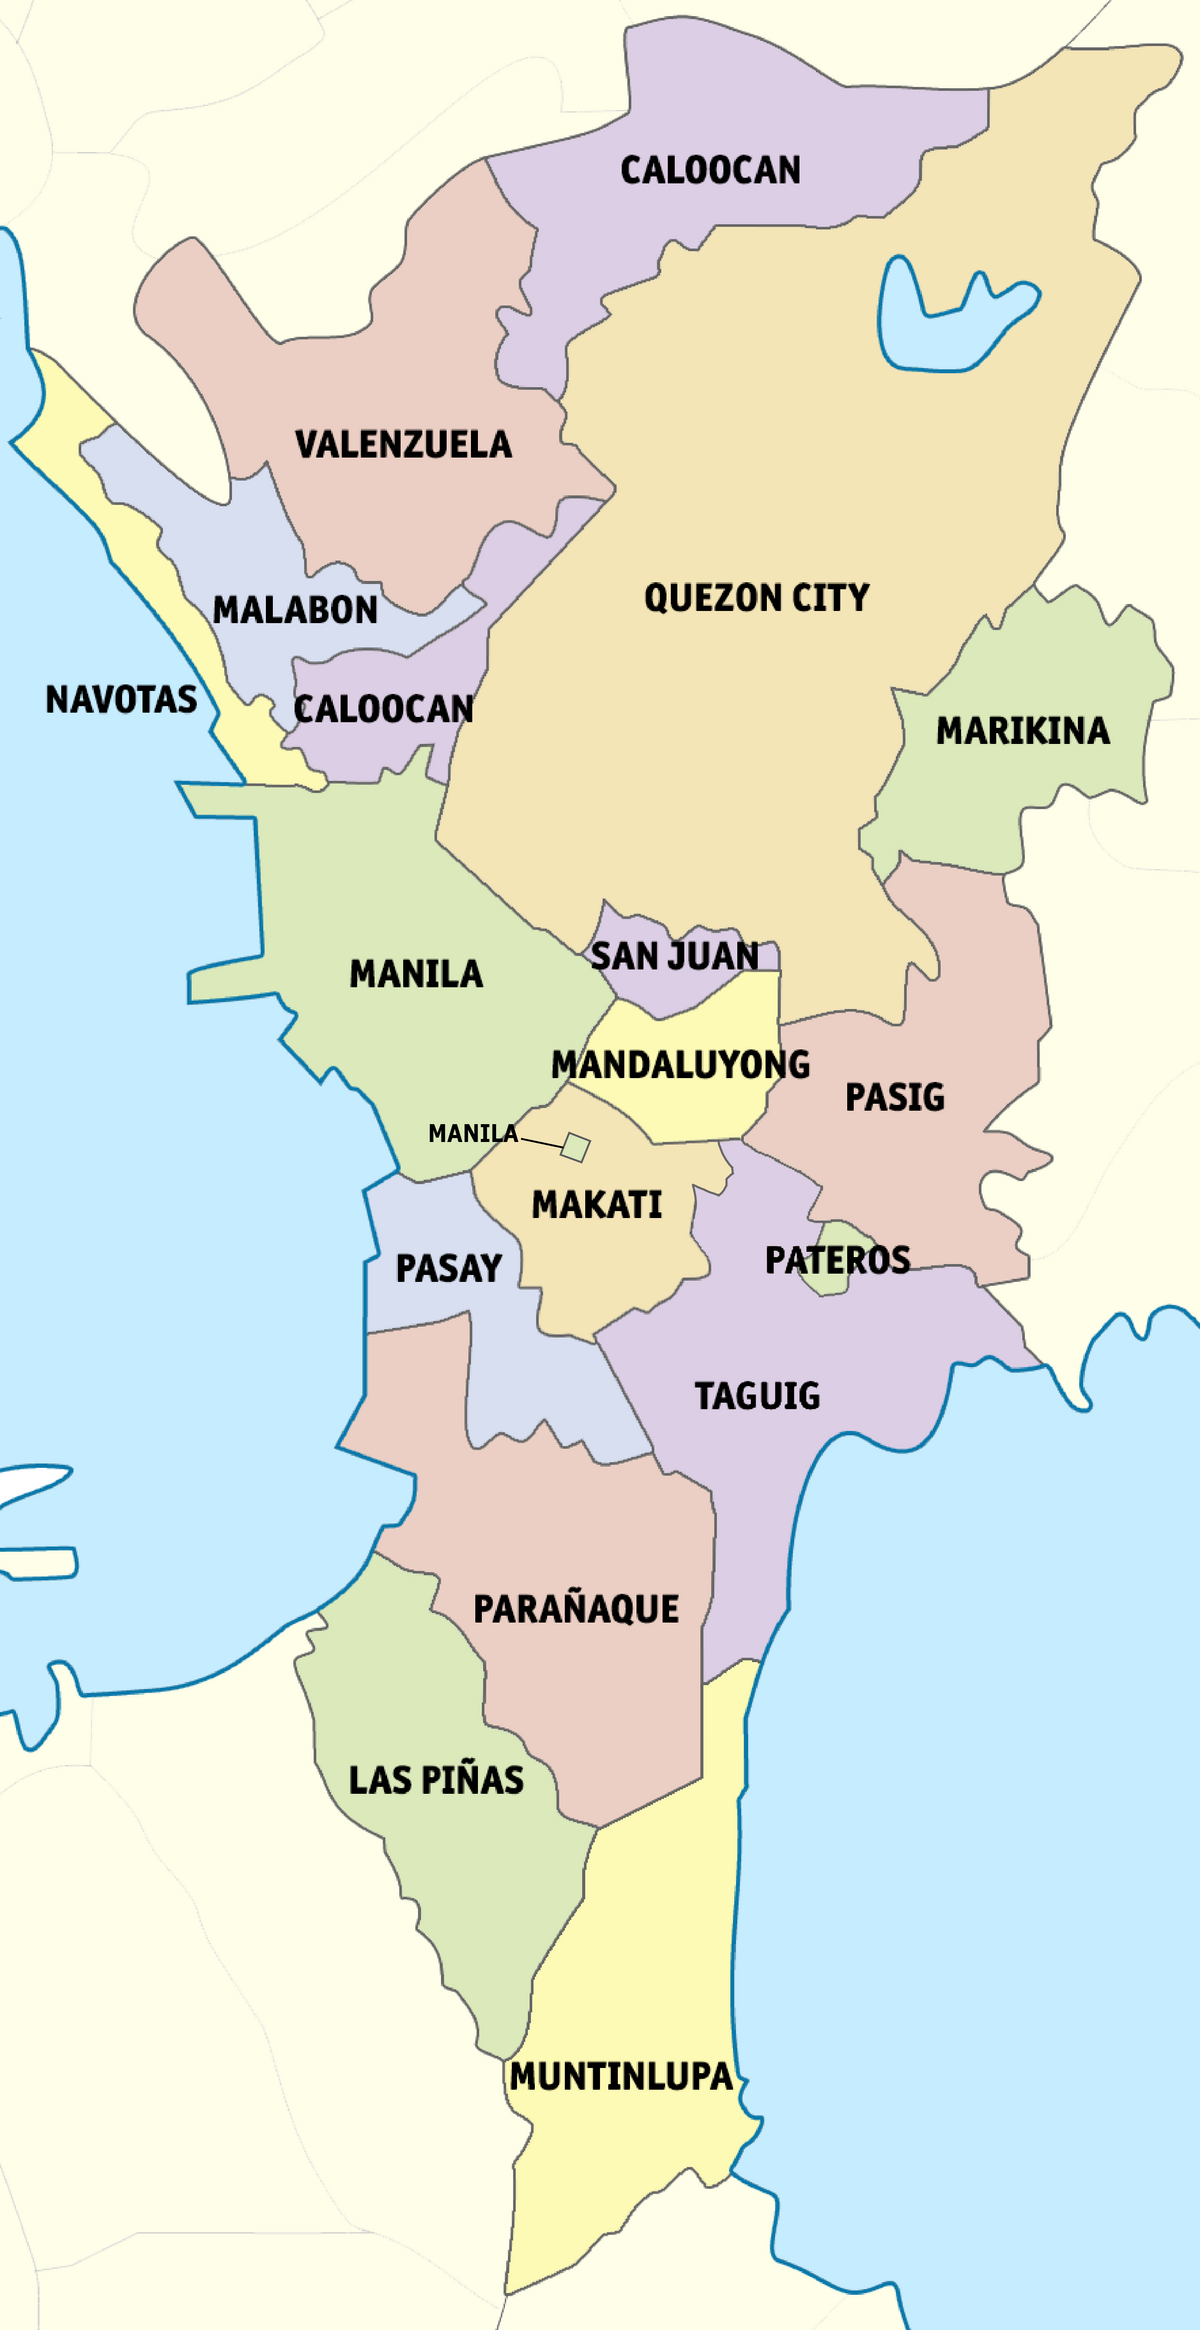 Which city is Manila located?